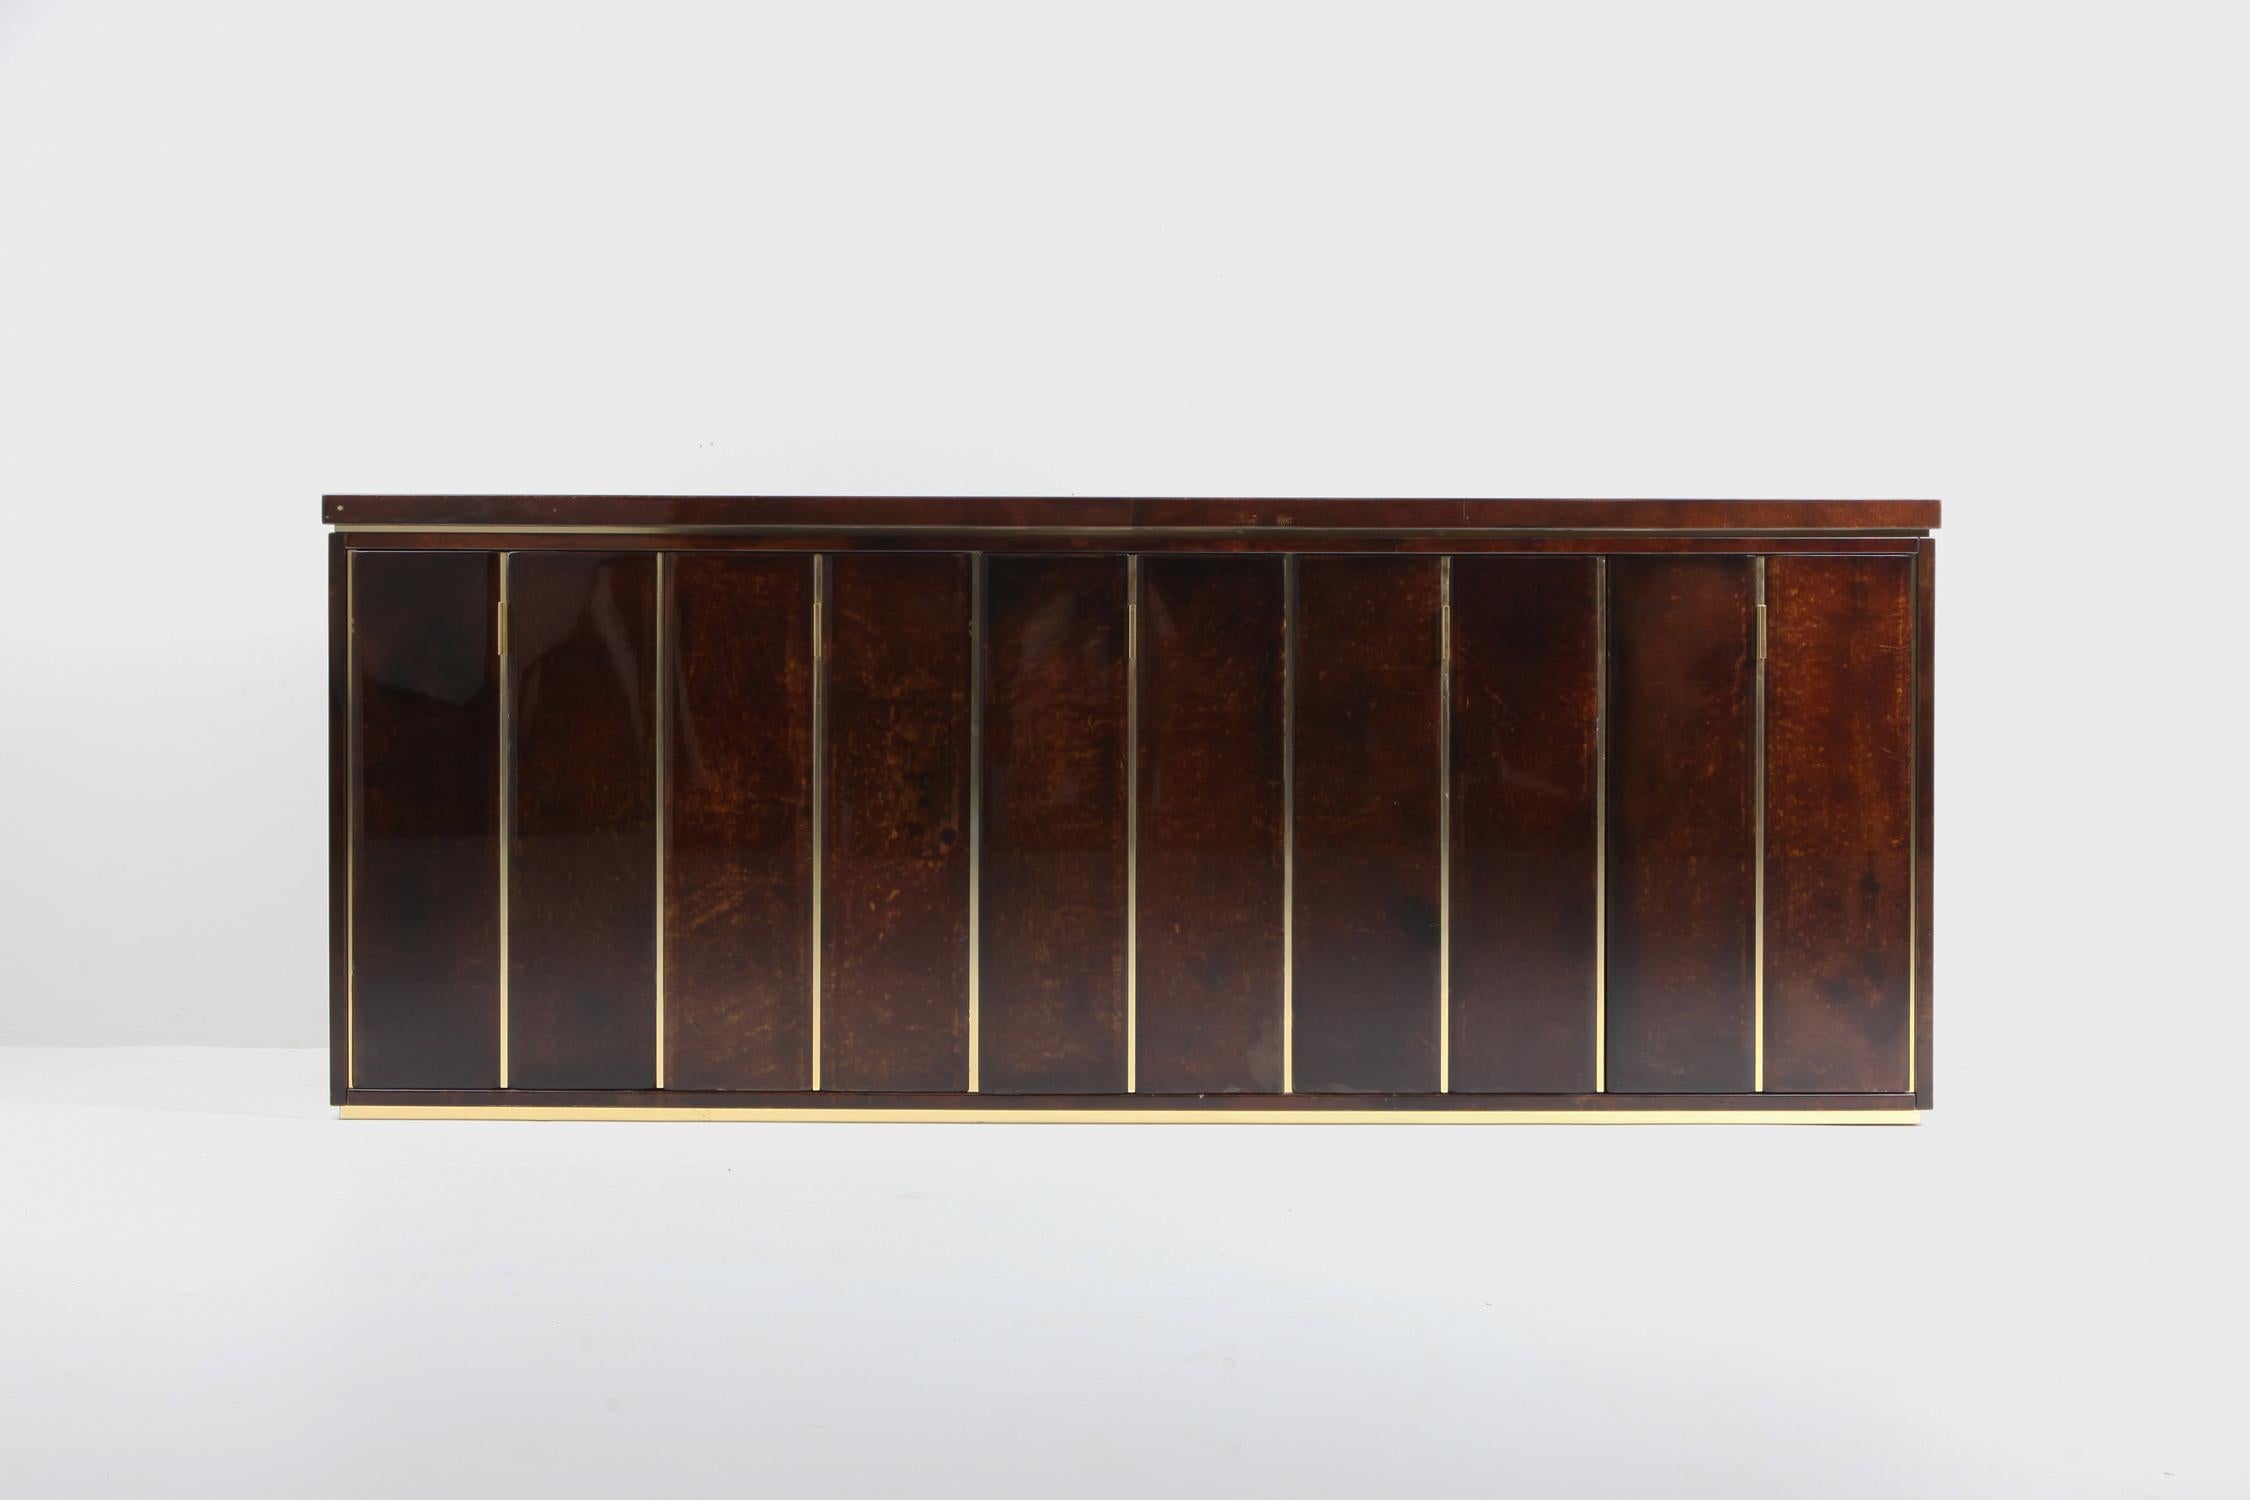 Postmodern metropolitan chic sideboard in lacquered parchment and brass by Aldo Tura, Italy, 1960s.

In our extra images you see the piece presented with two cognac leather camaleonda lounge chairs buy Mario Bellini and an Aldo Tura sliding top